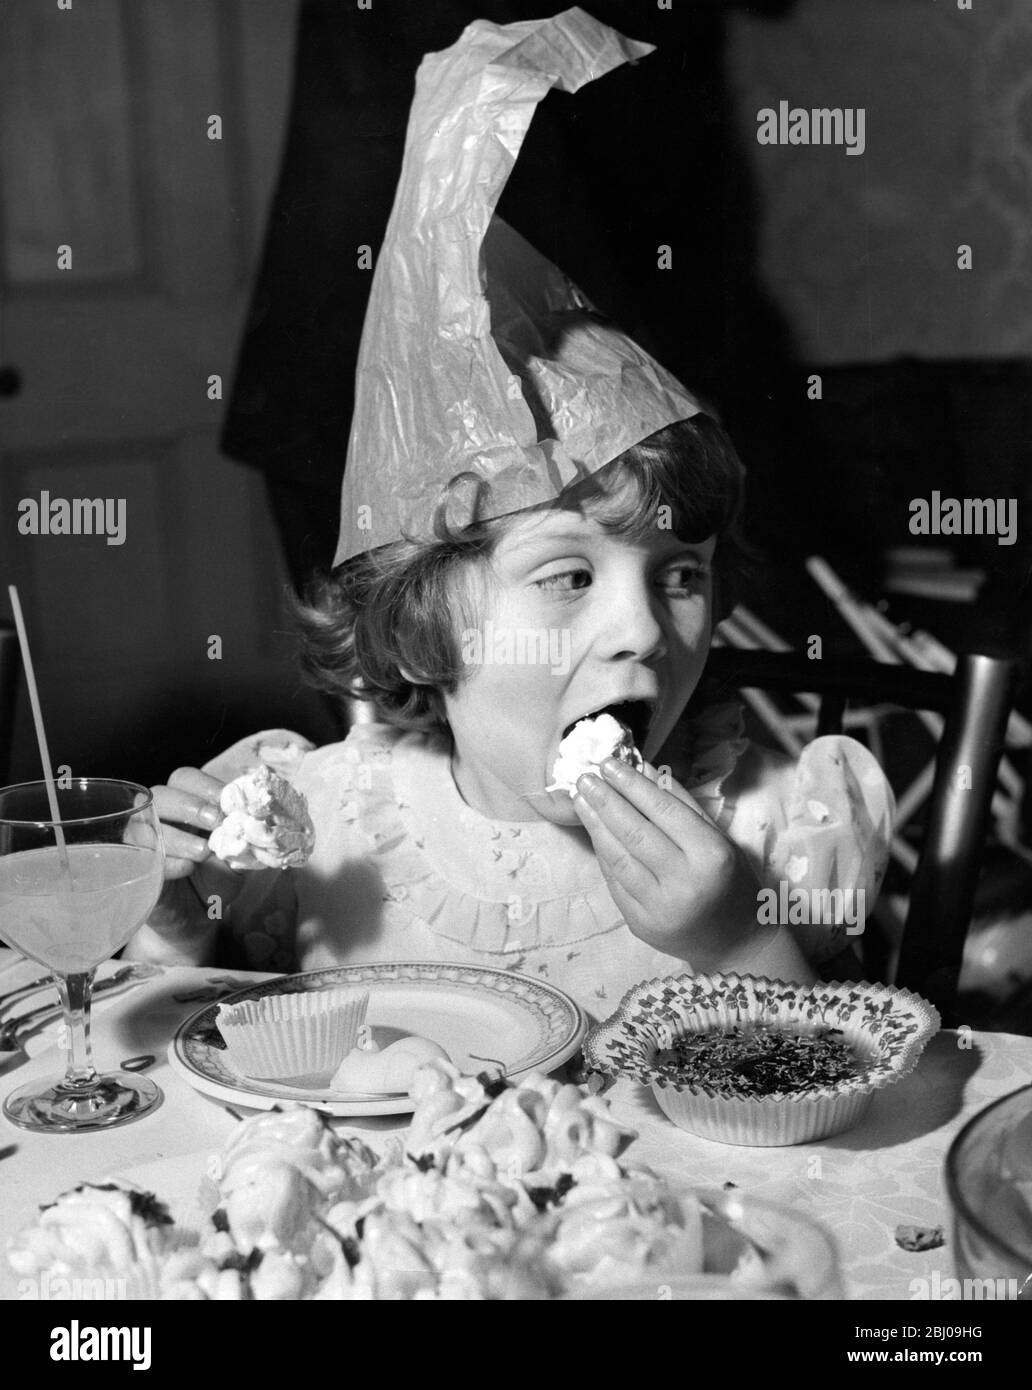 Della Anphlett , age 6 , eats a cup cake at the Variety Club Christmas Party for children at St. Agnes Orphanage, Thames Ditton. - 15 Ennismore Gardens, London SW7, England - 19 December 1959 Stock Photo